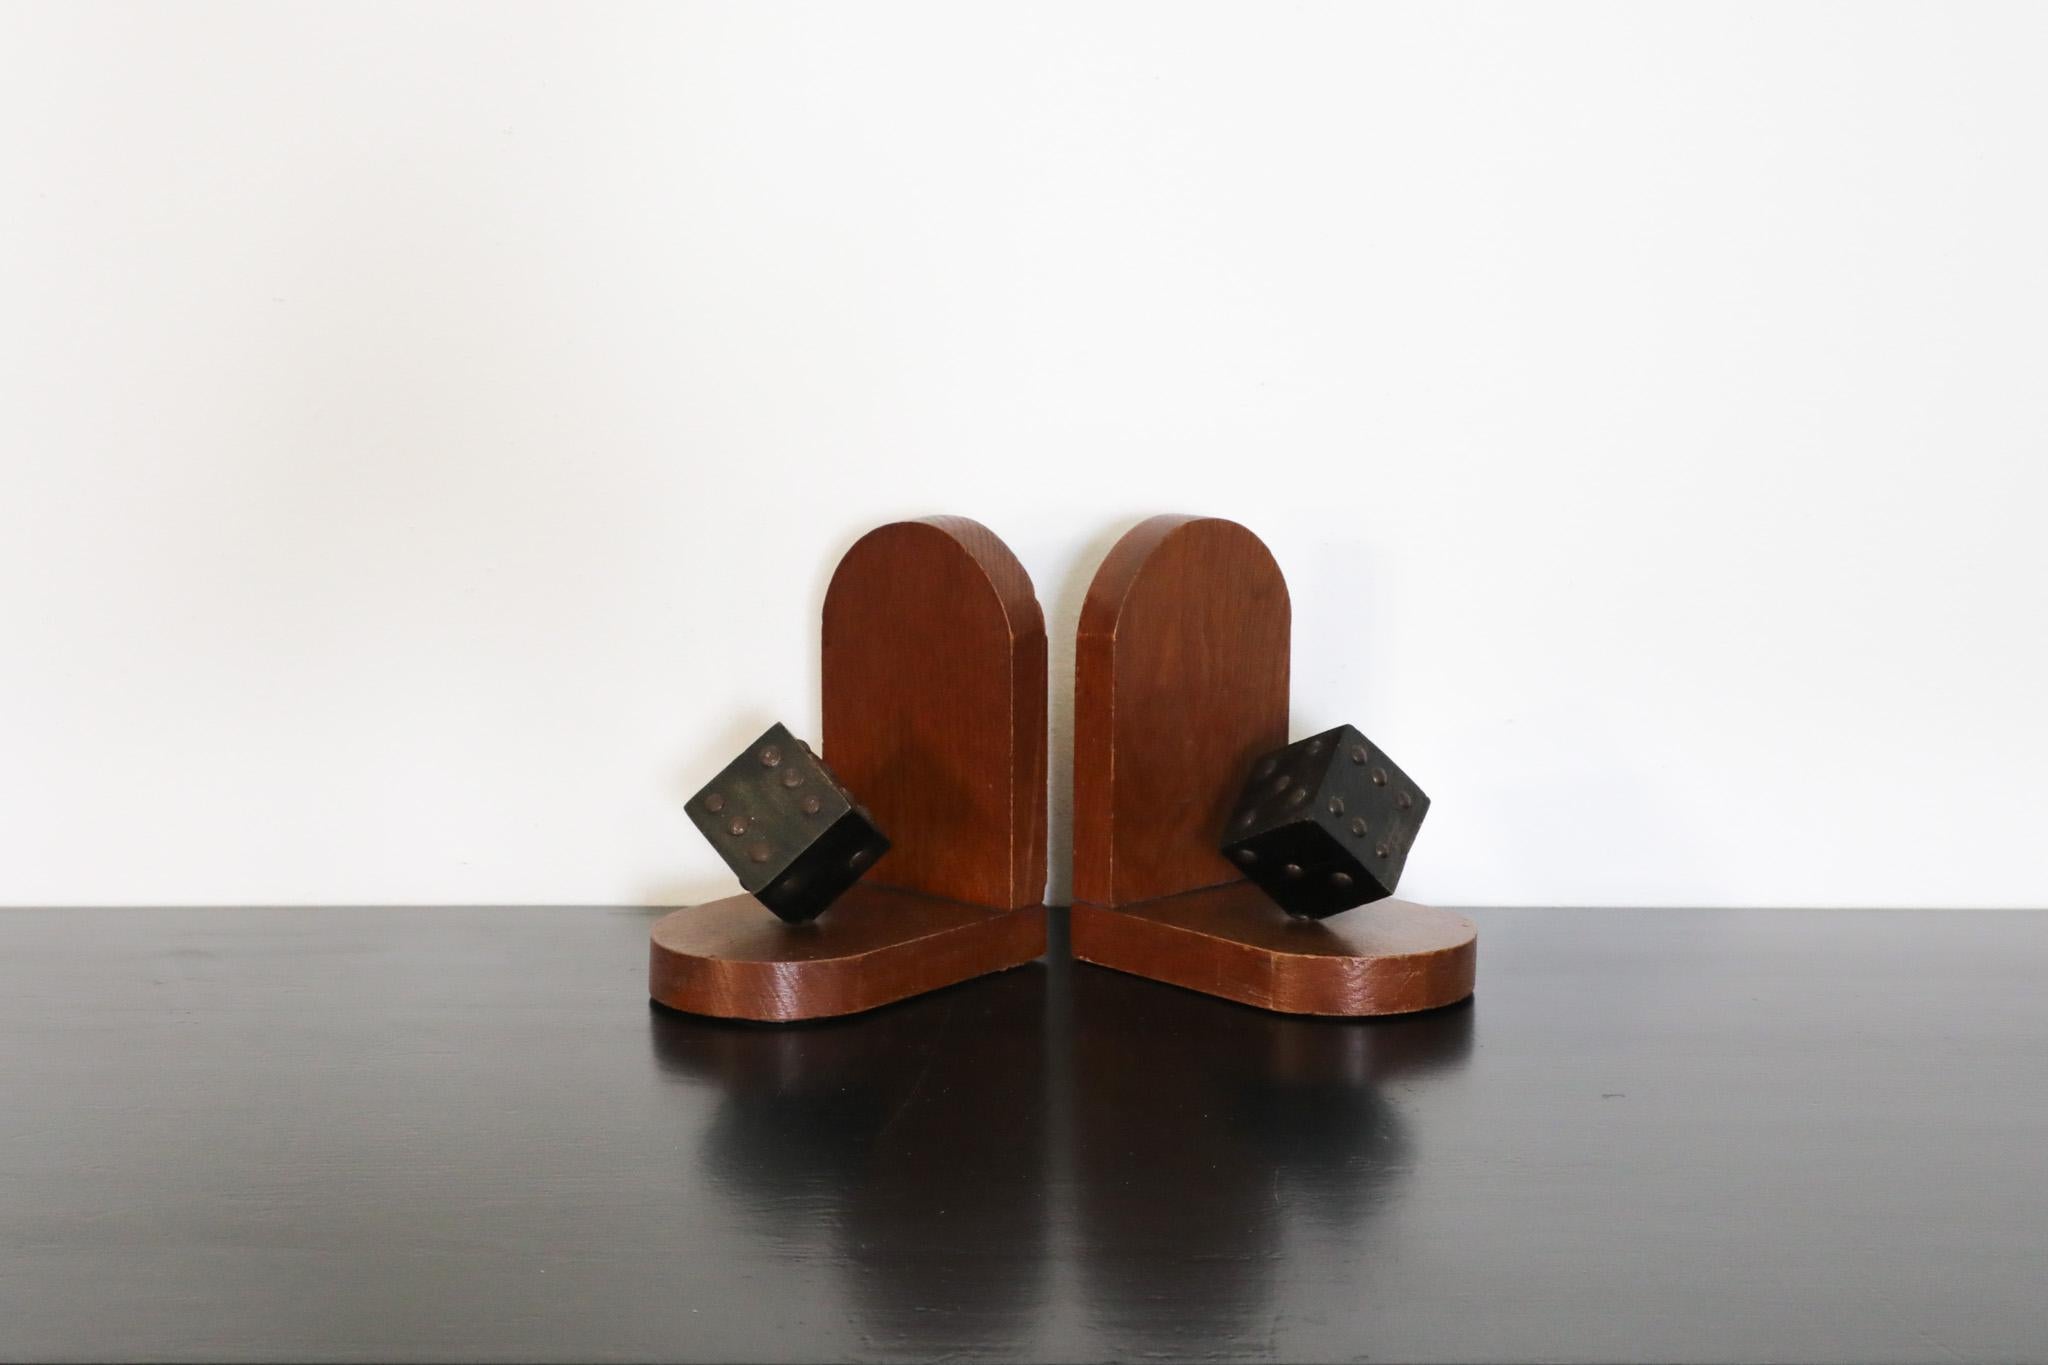 Painted Pair of Wooden Arts & Crafts Dice Bookends For Sale